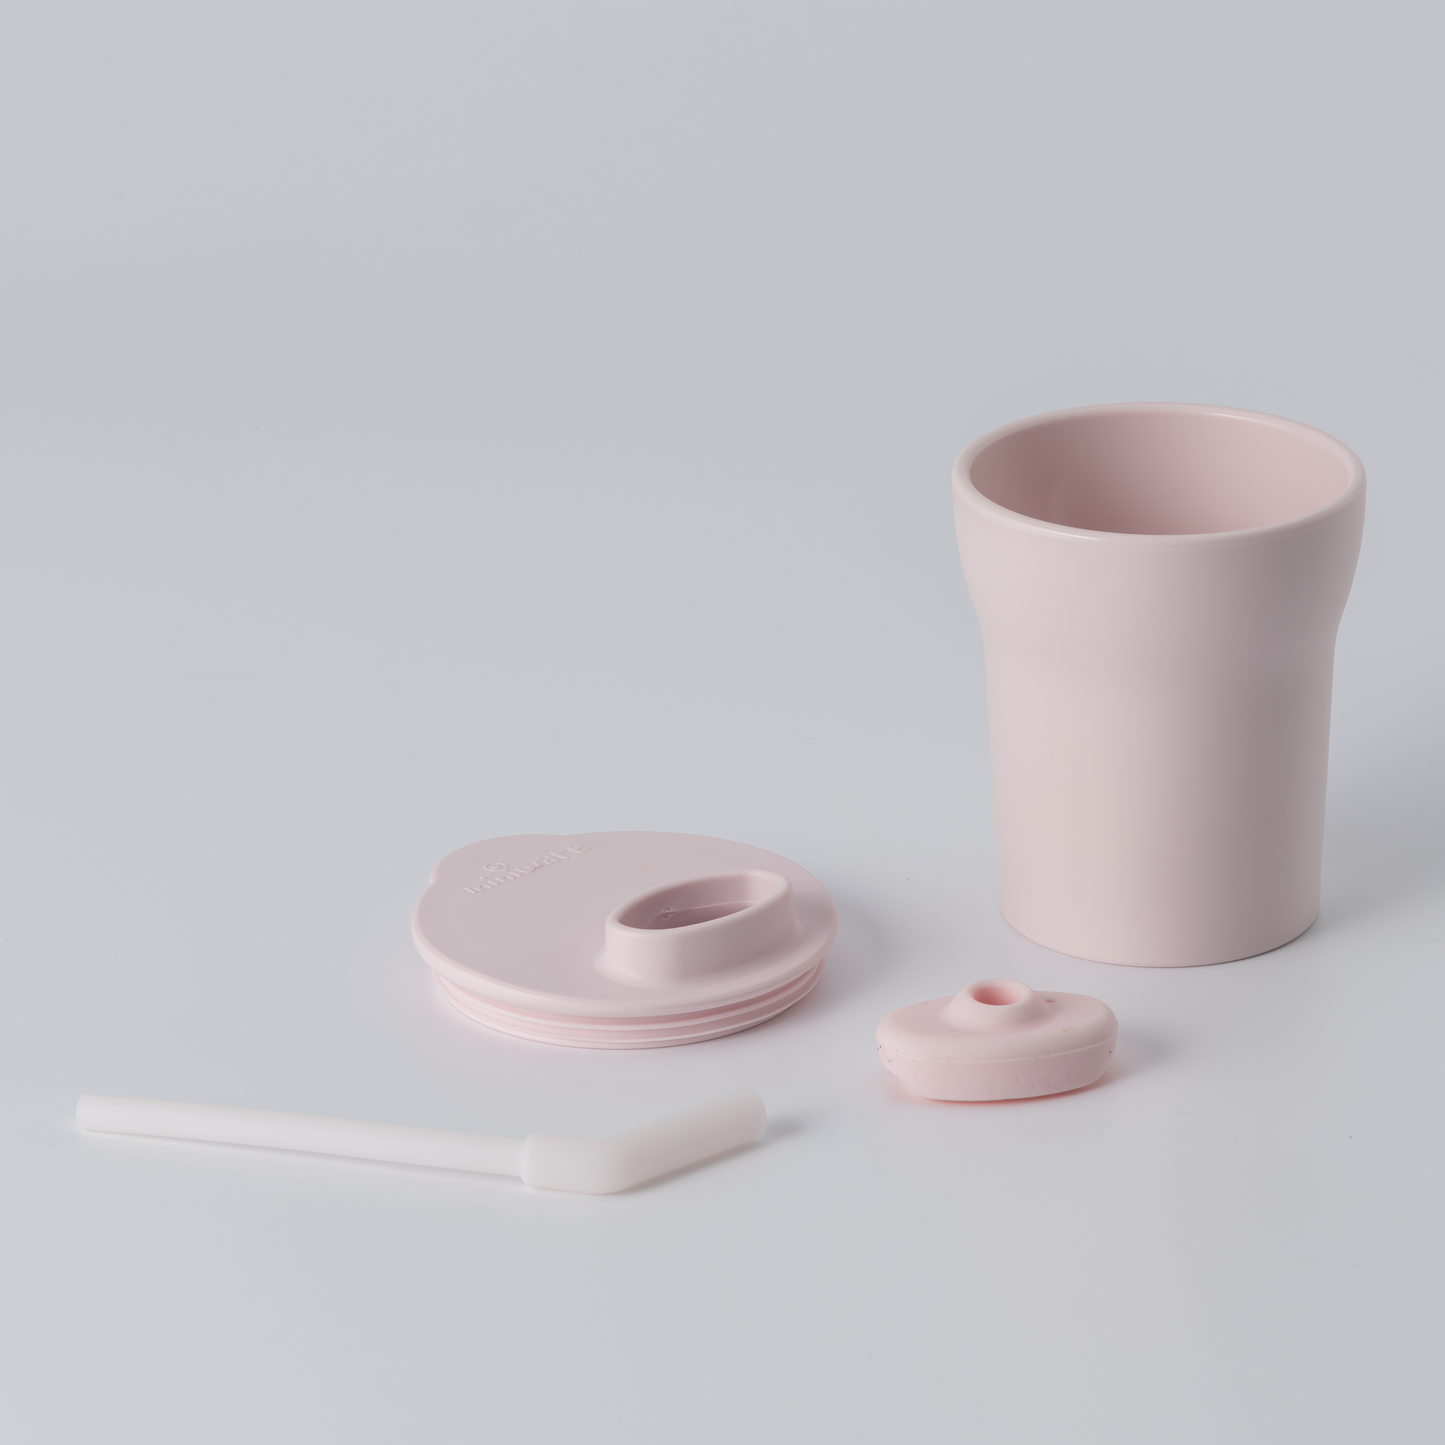 Sip & Snack Set (Cotton Candy/Cotton Candy)